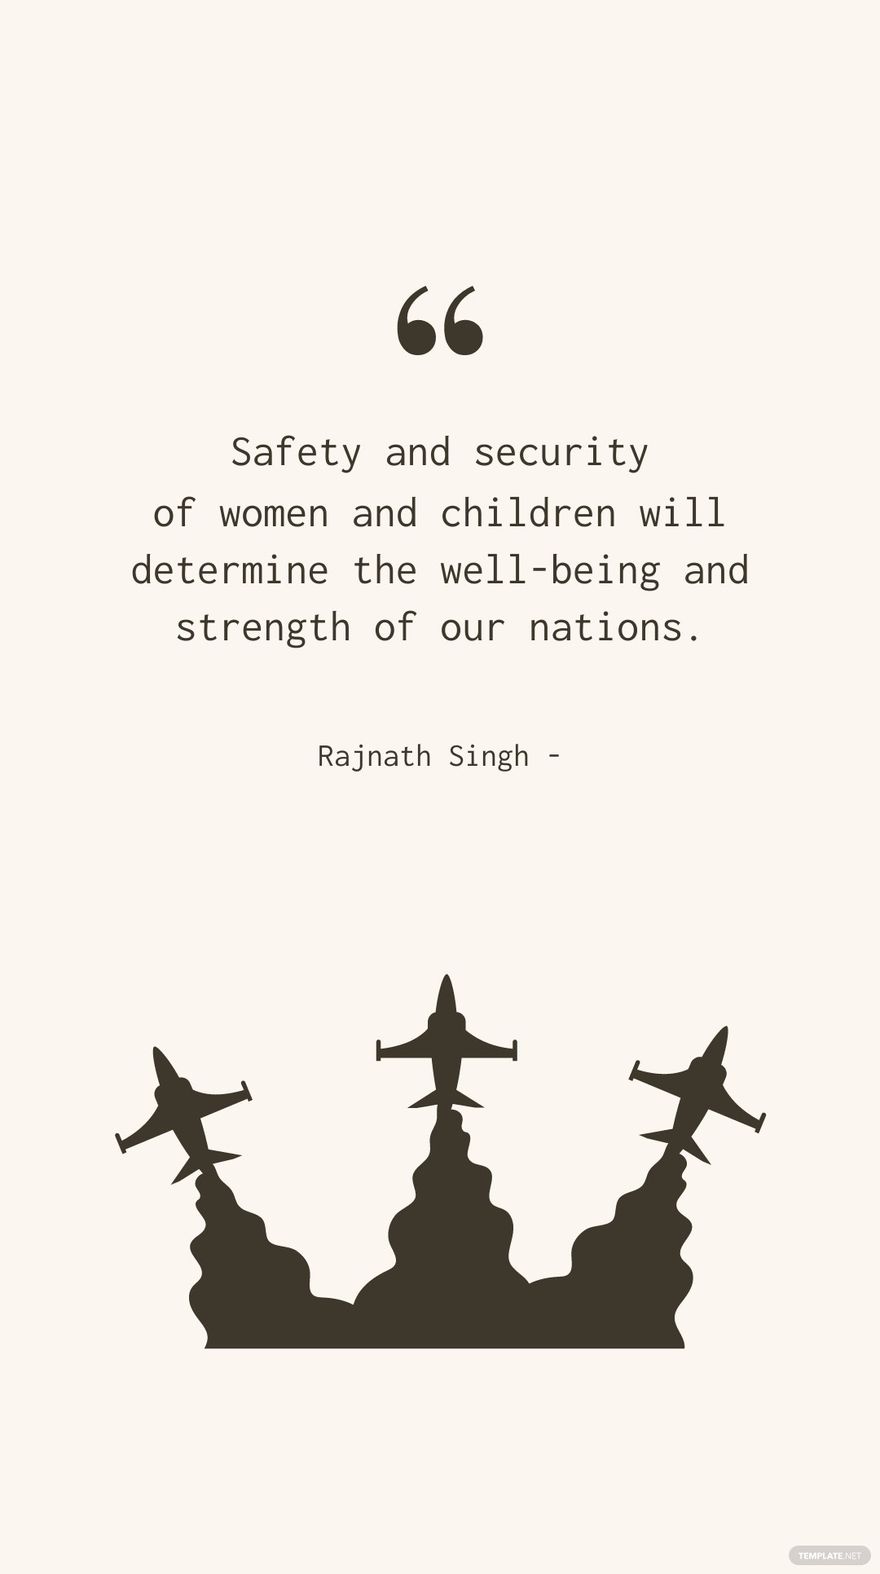 Rajnath Singh - Safety and security of women and children will determine the well-being and strength of our nations.